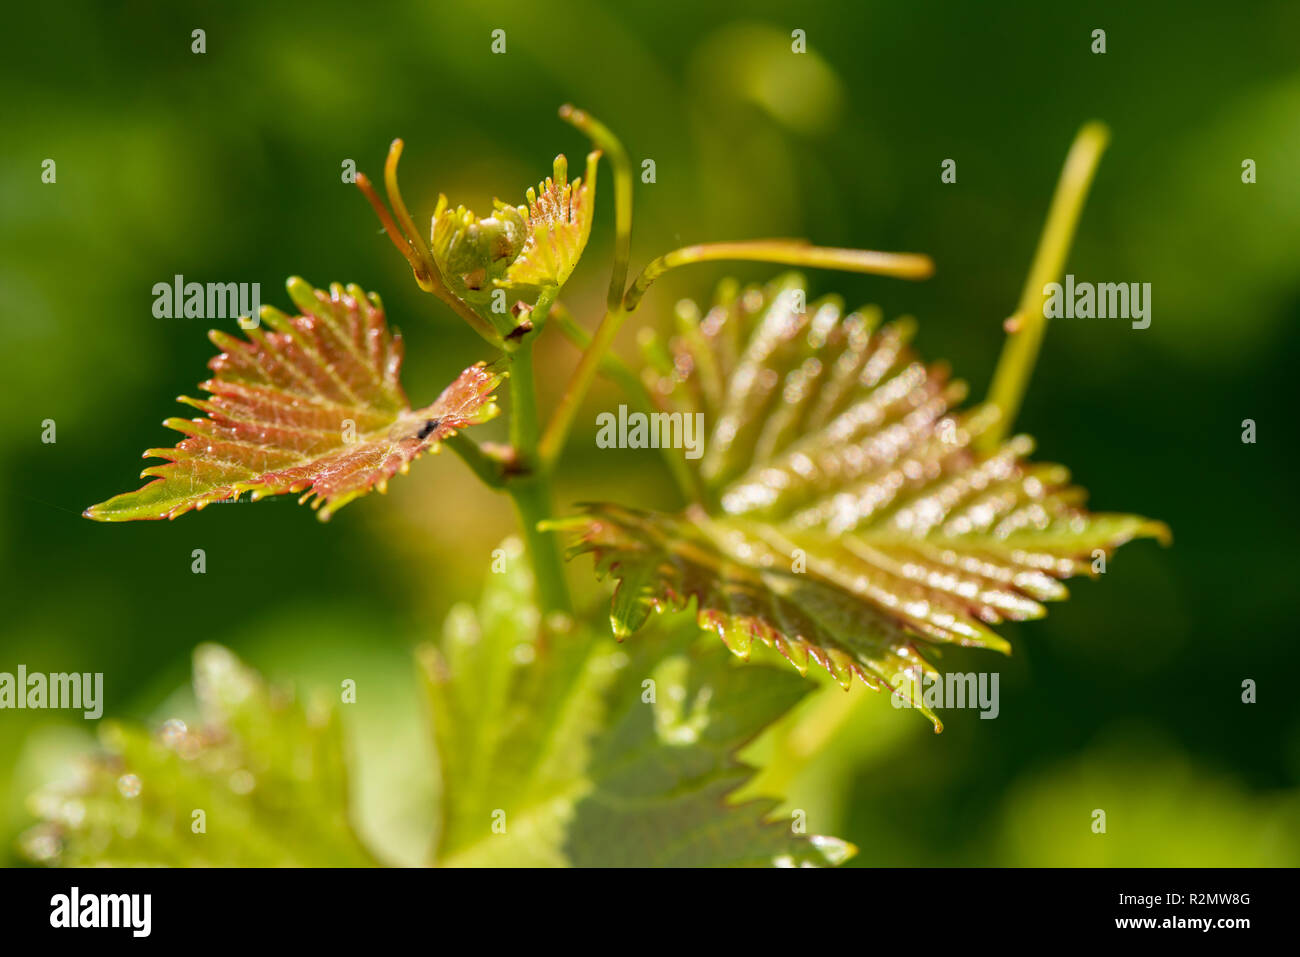 Grapevine as a medicinal plant for natural medicine and herbal medicine Stock Photo